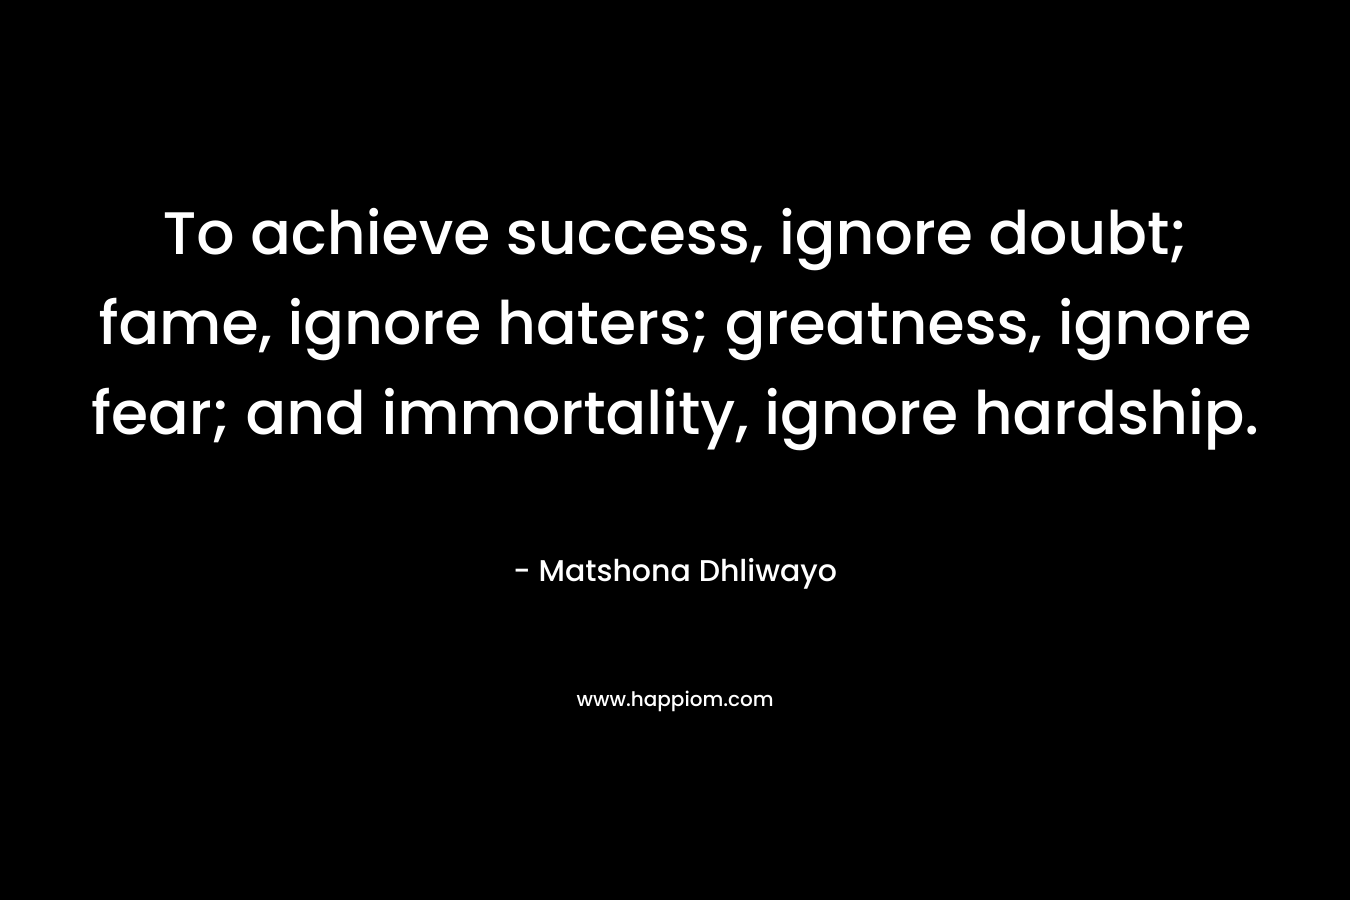 To achieve success, ignore doubt; fame, ignore haters; greatness, ignore fear; and immortality, ignore hardship.